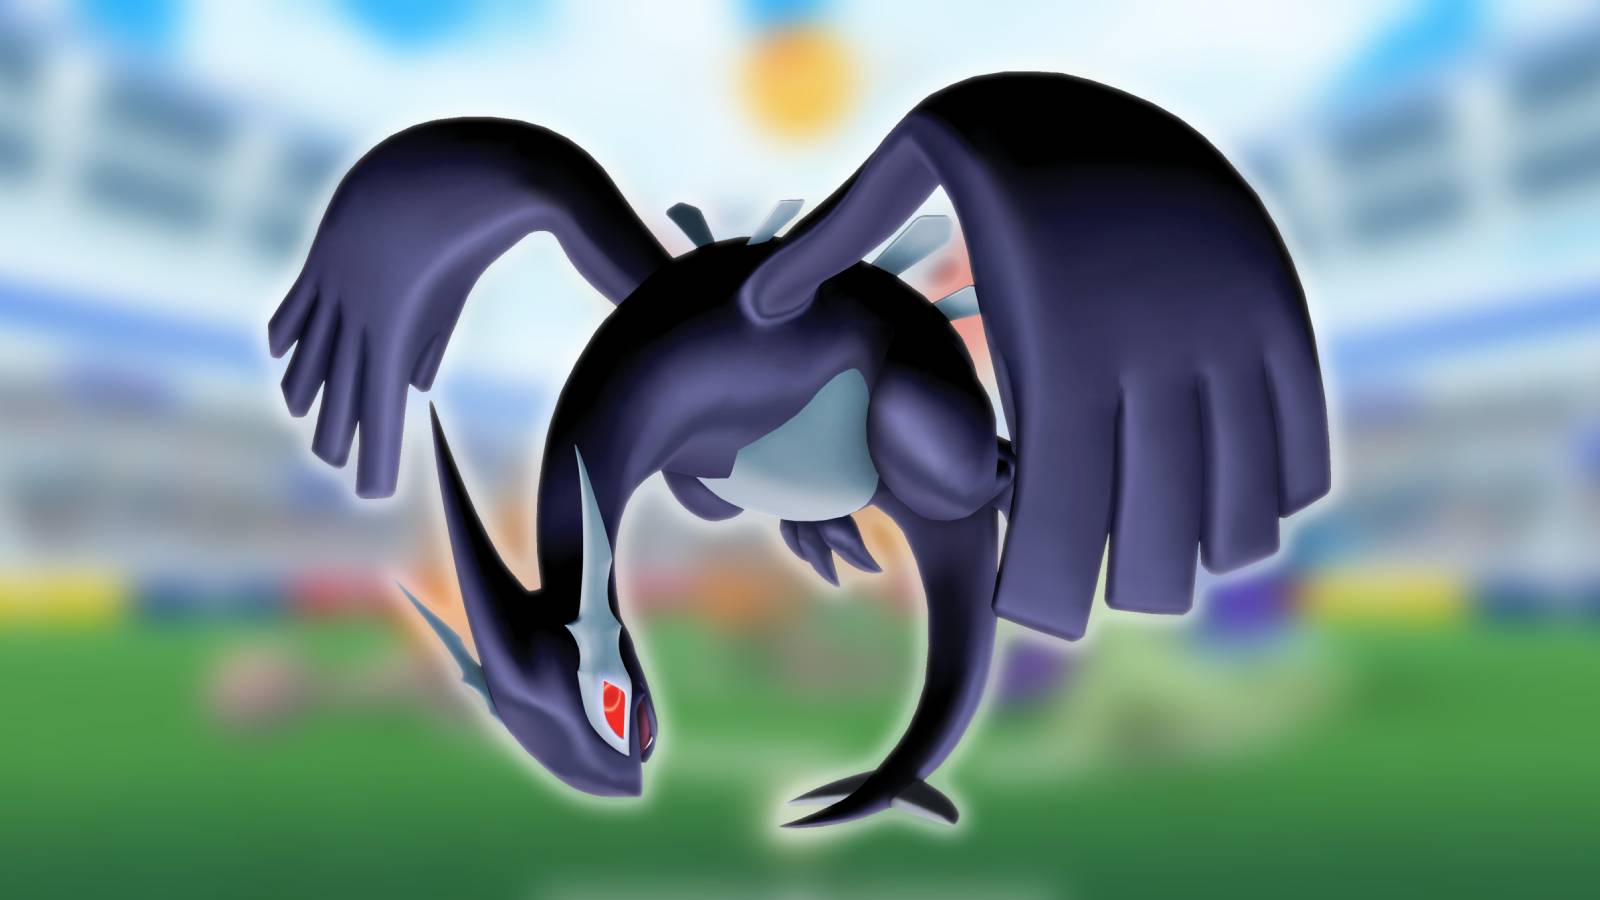 The formidable Shadow Lugia appears against a blurred image of a Pokemon Go raid